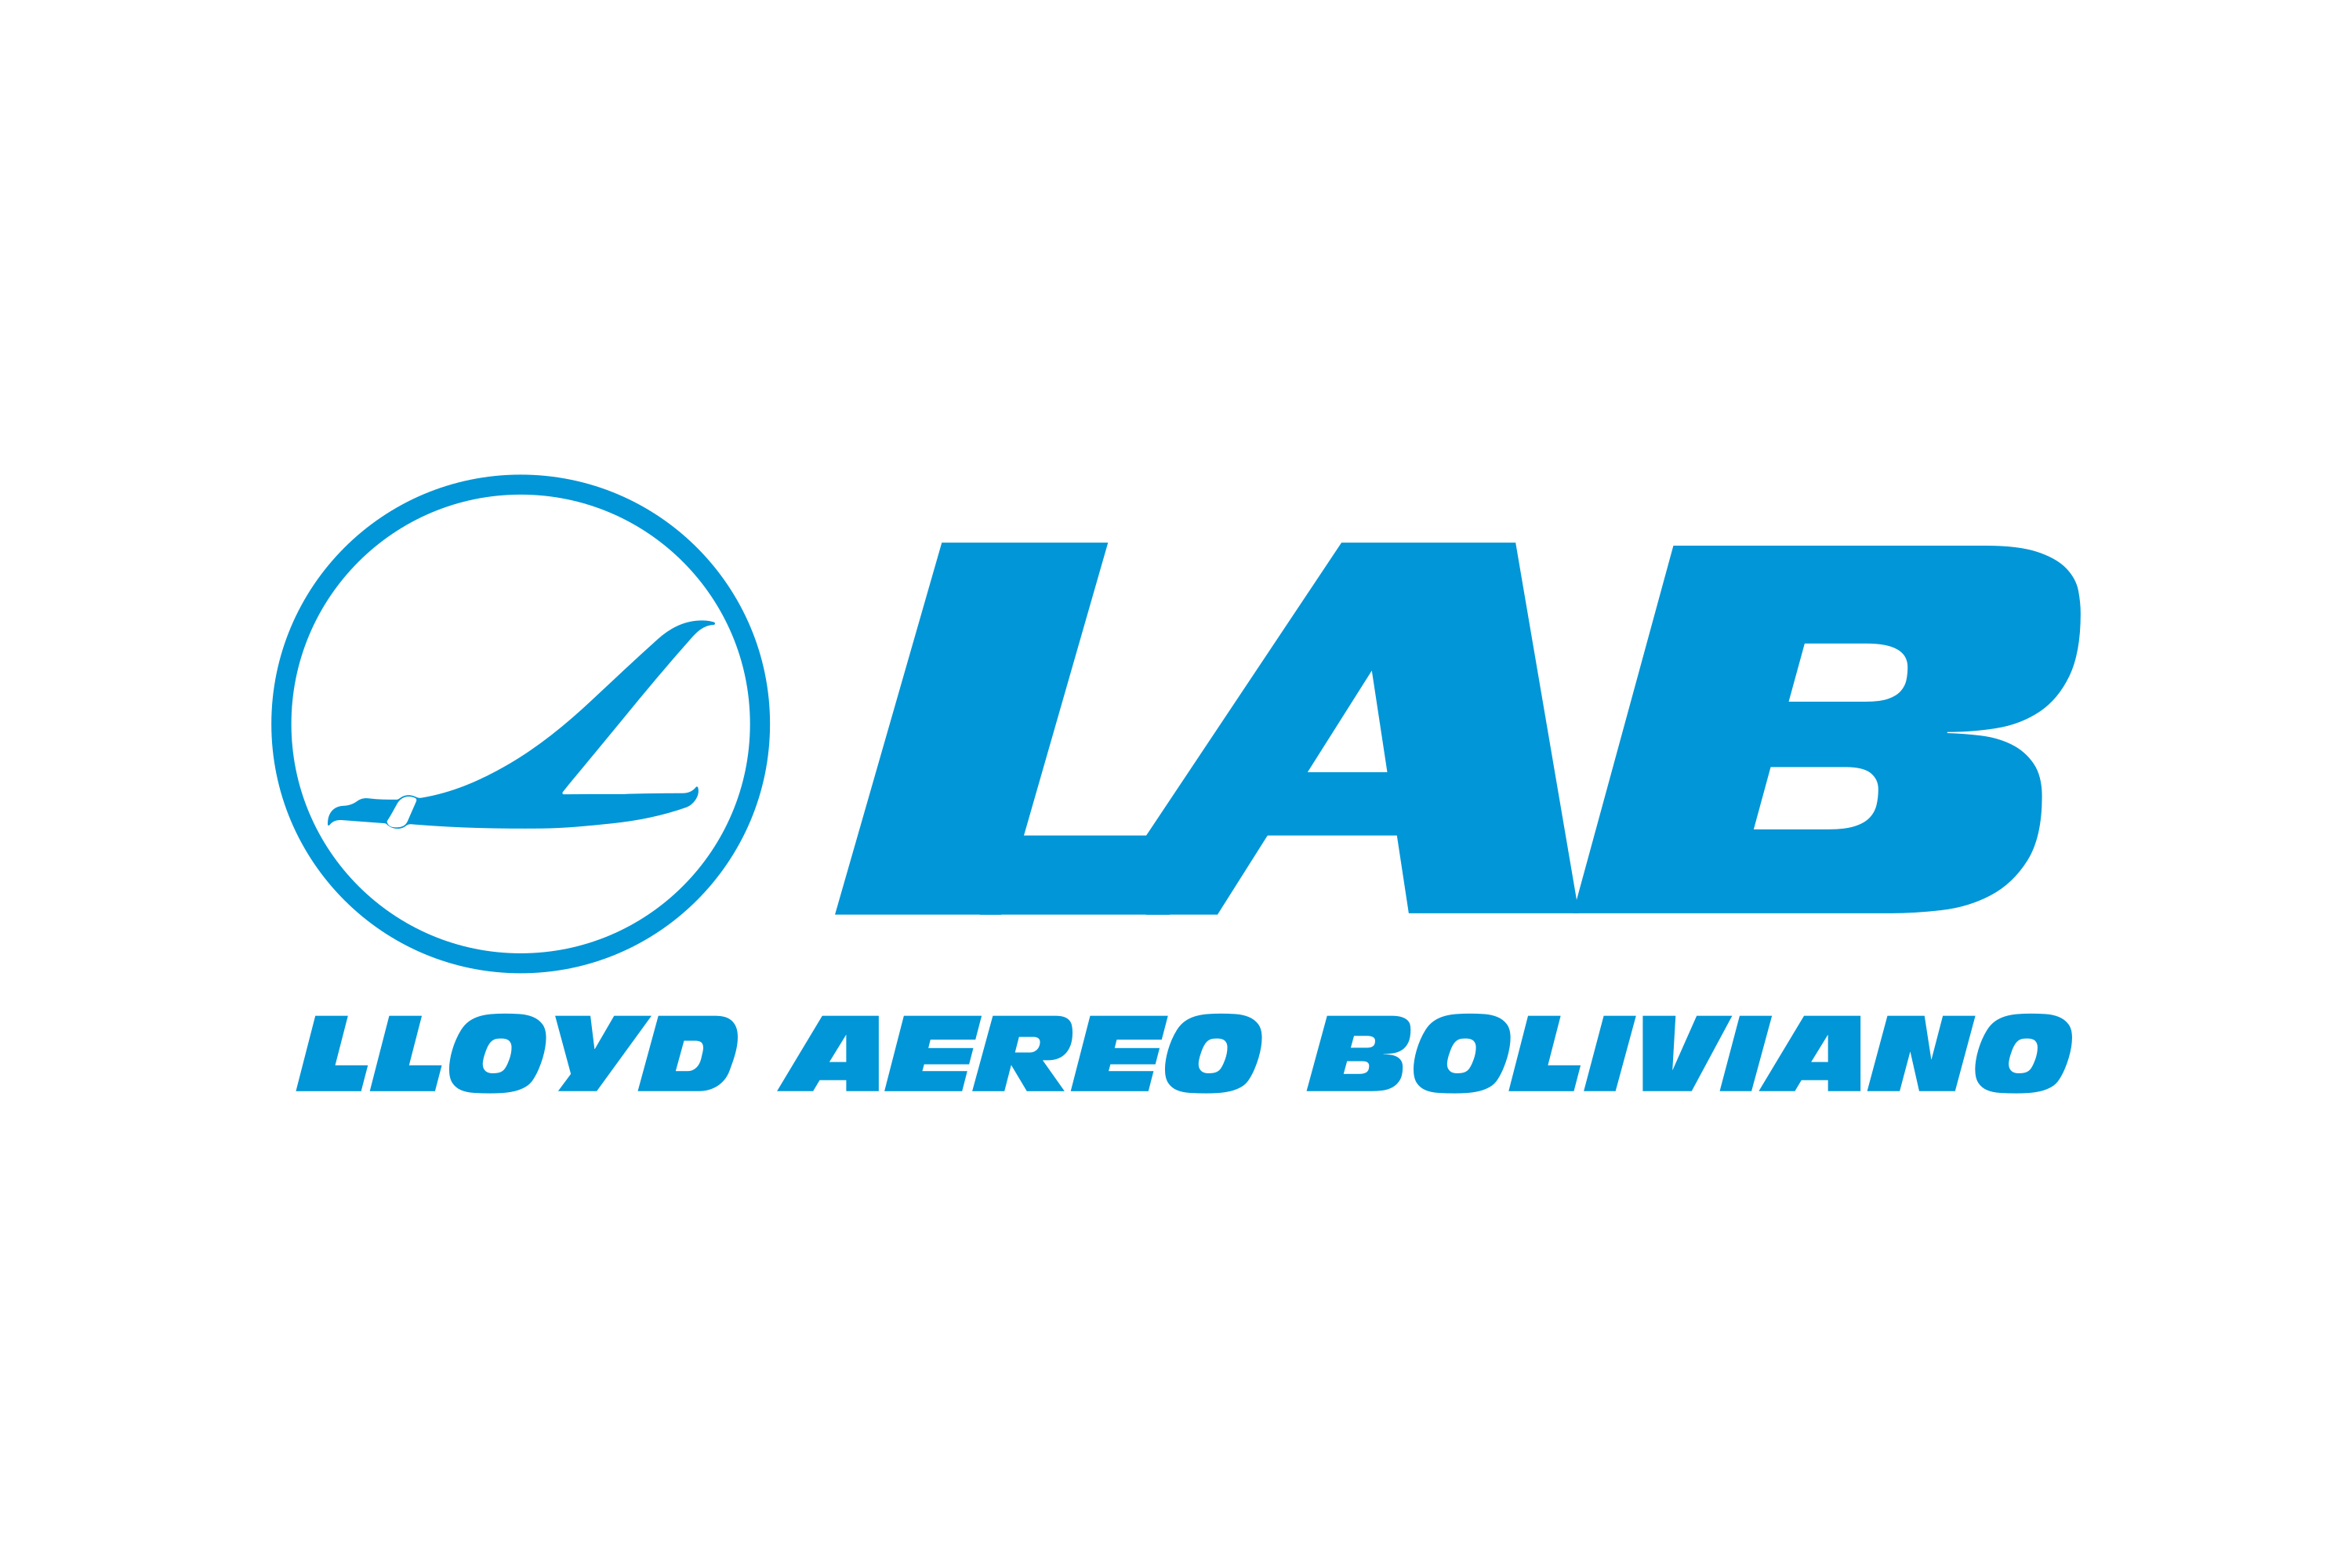 Download Lloyd Aéreo Boliviano Logo in SVG Vector or PNG File Format